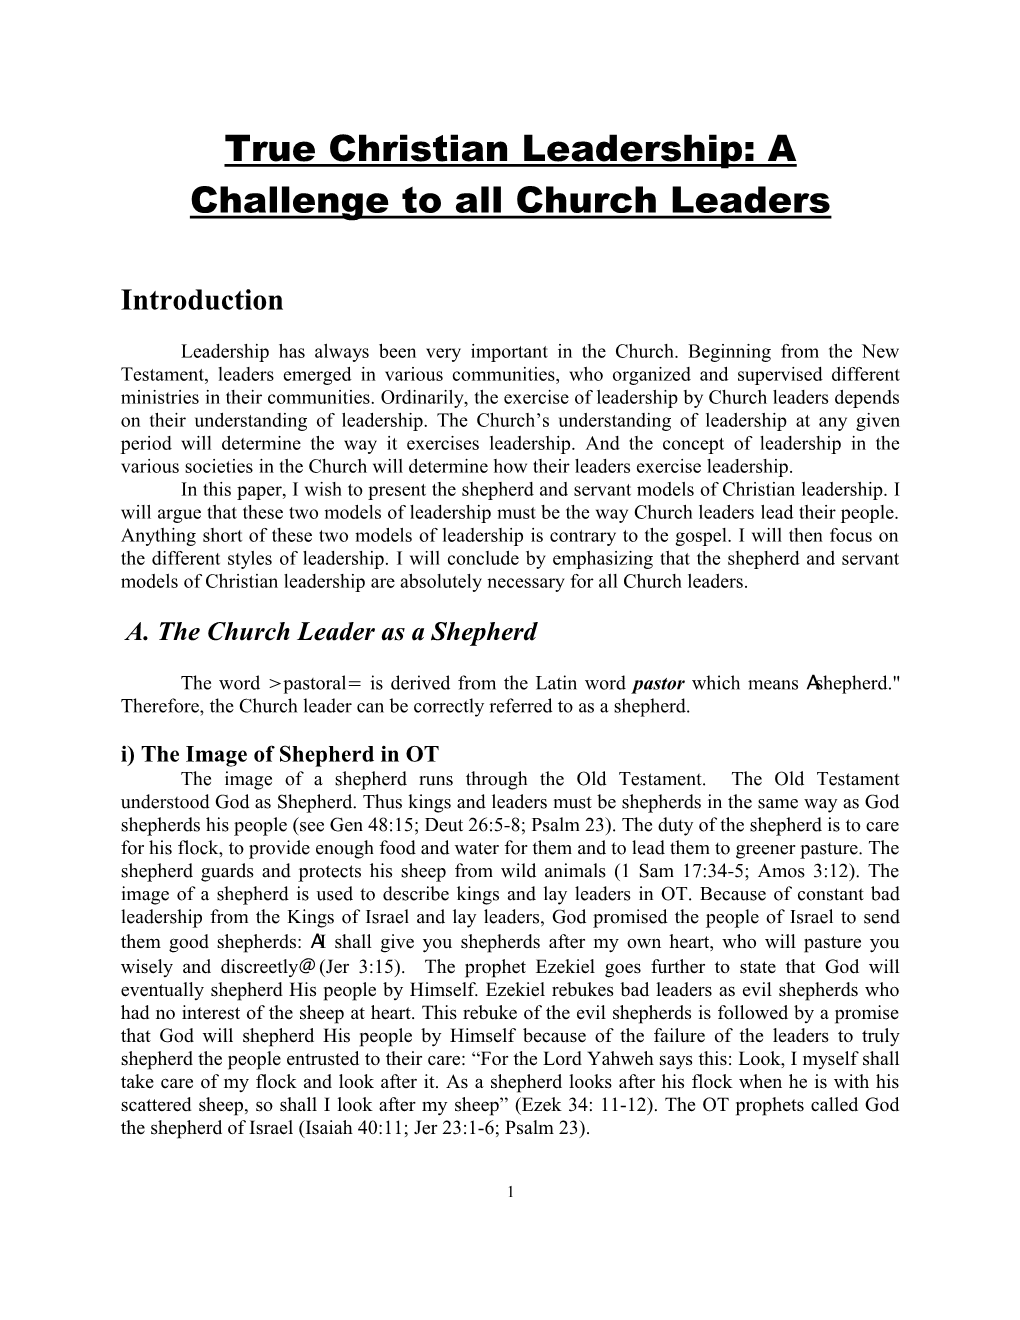 True Christian Leadership: a Challenge to All Church Leaders